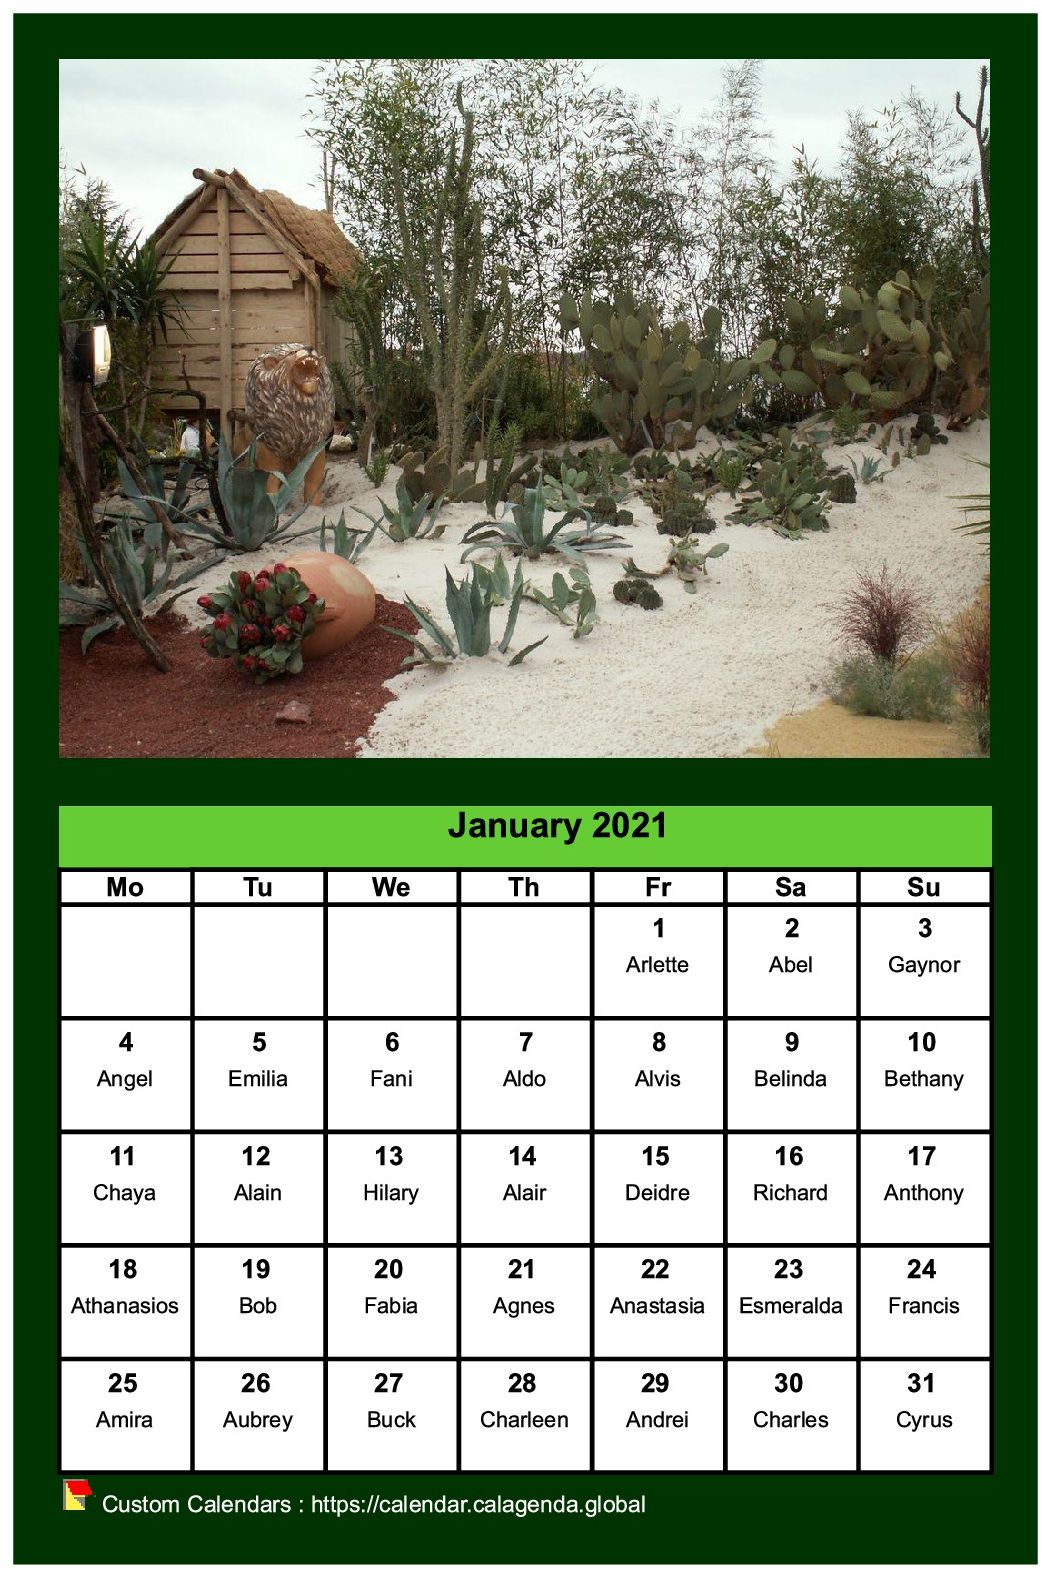 Calendar monthly 2021 with a different photo every month